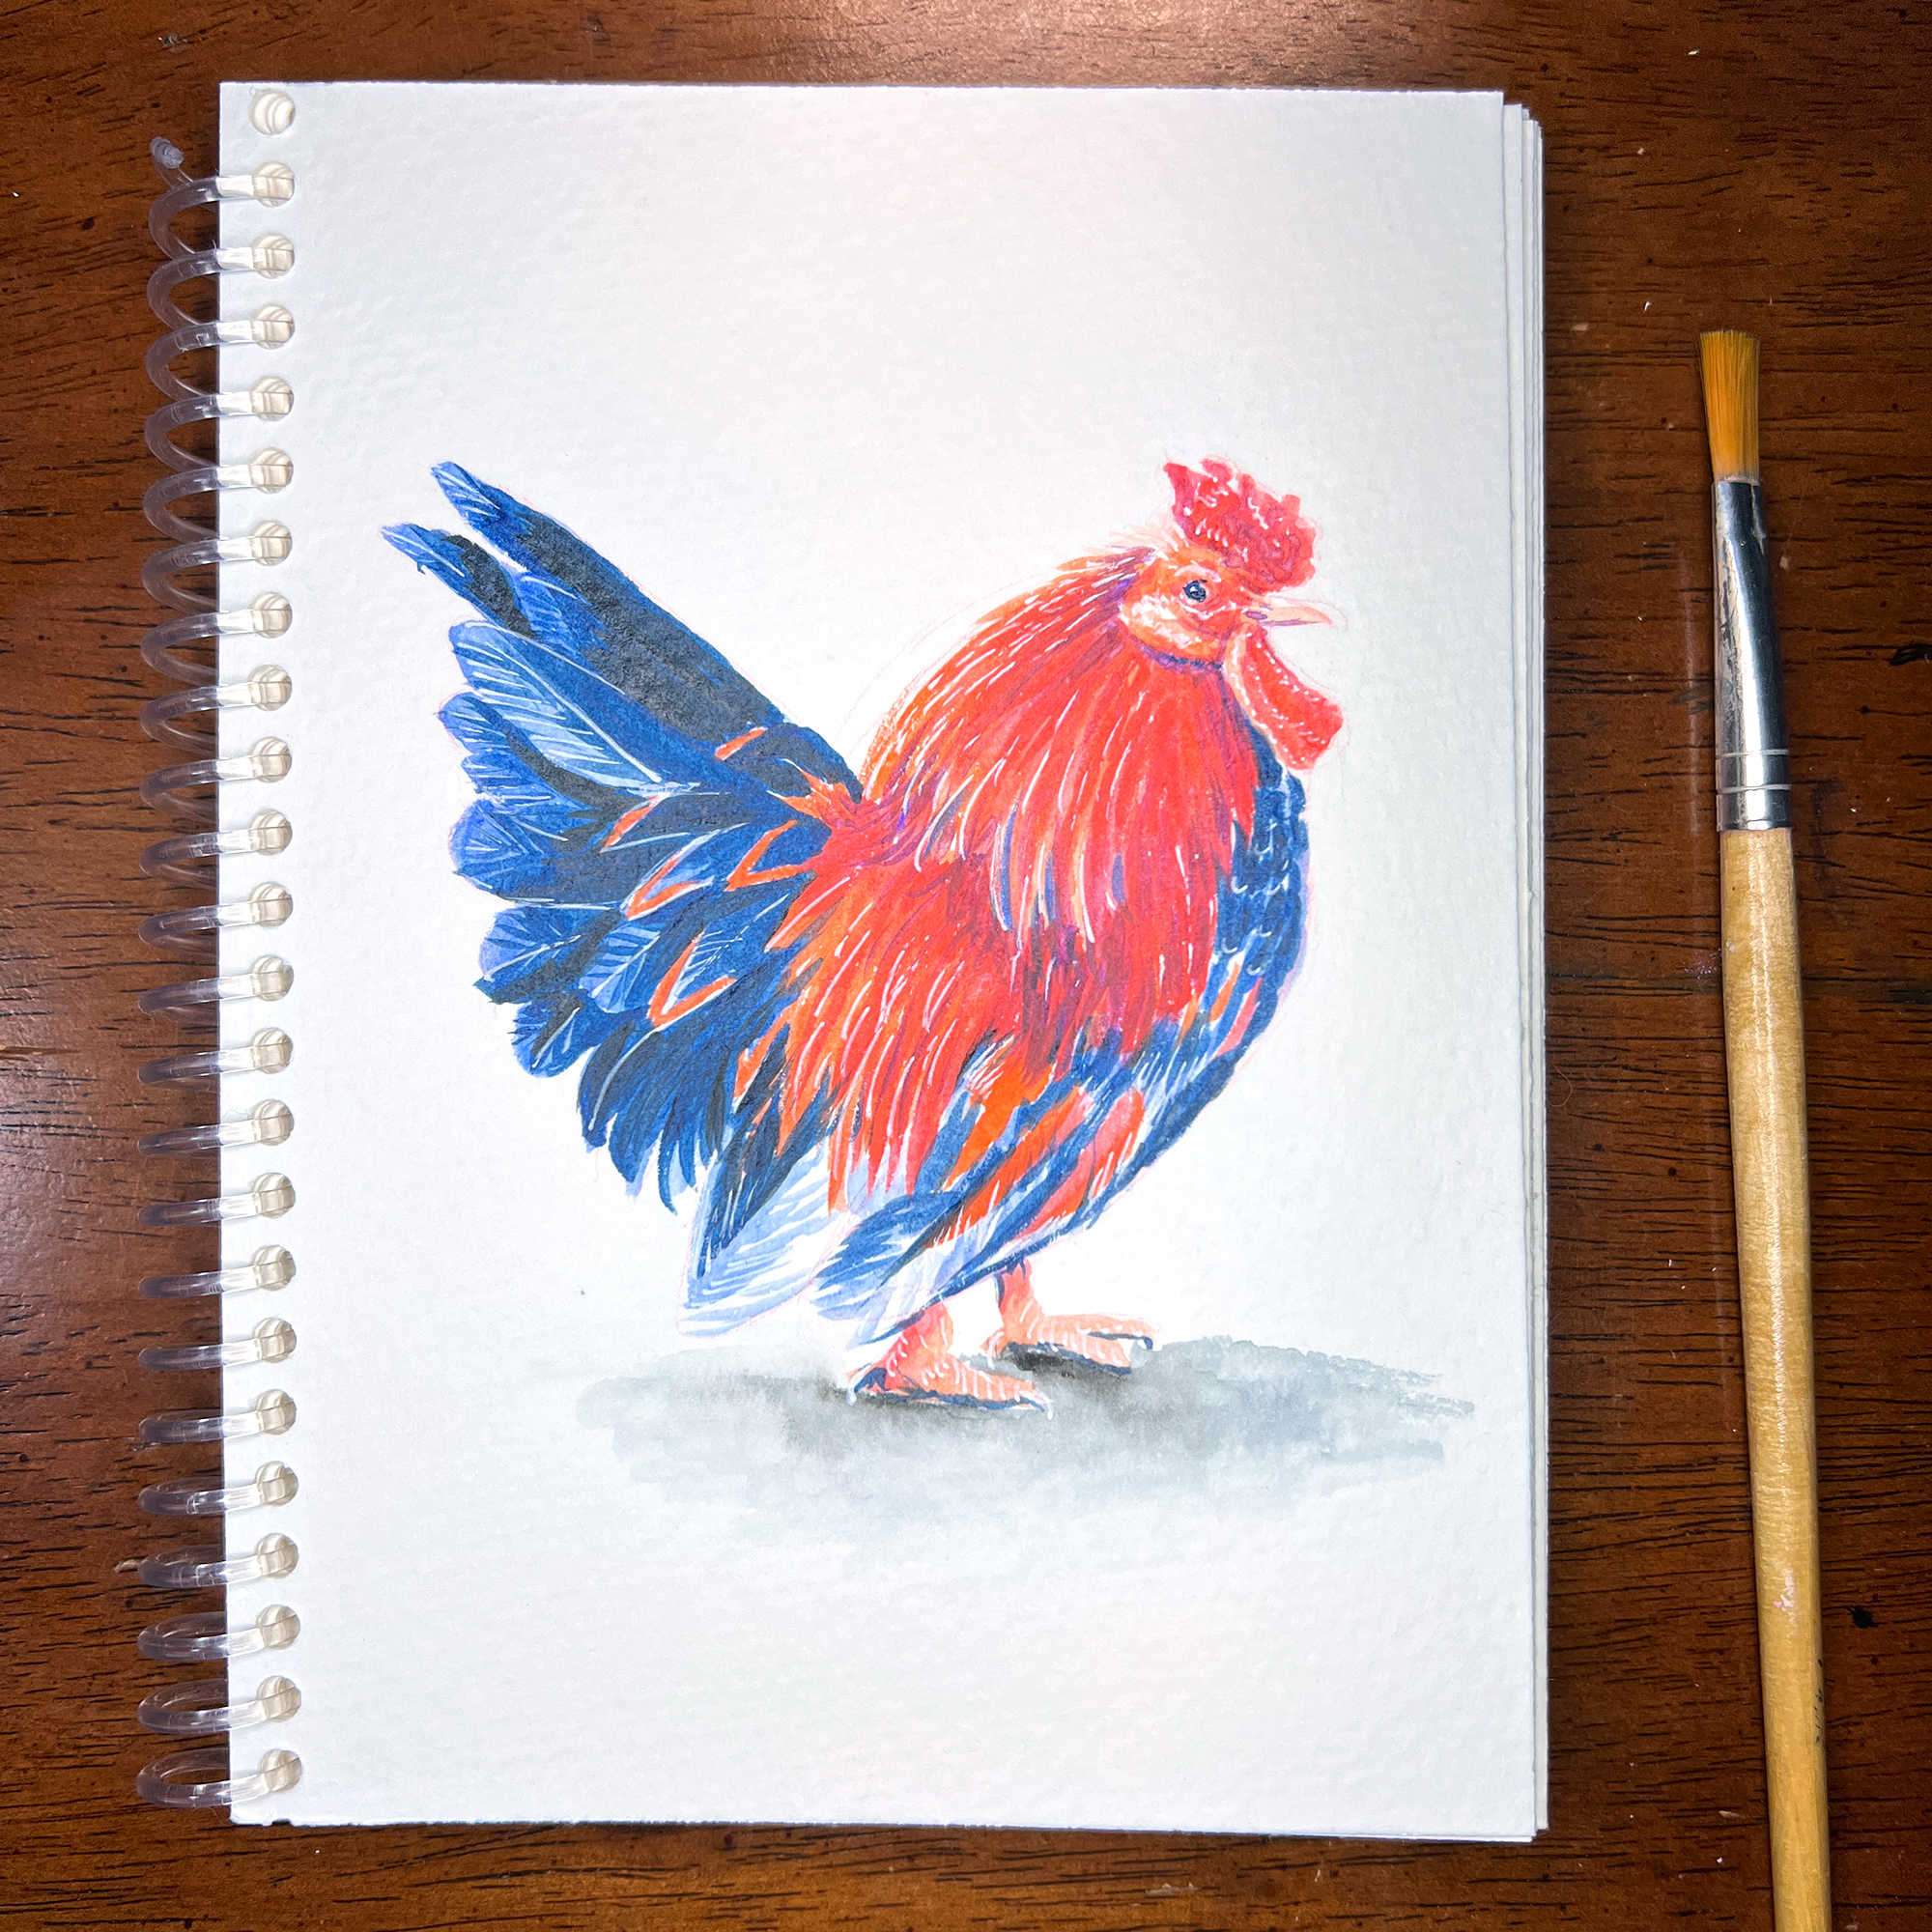 A colorful Owl/Rooster - Original Watercolor Painting on a sketchpad, with a paintbrush placed next to it on a wooden surface.